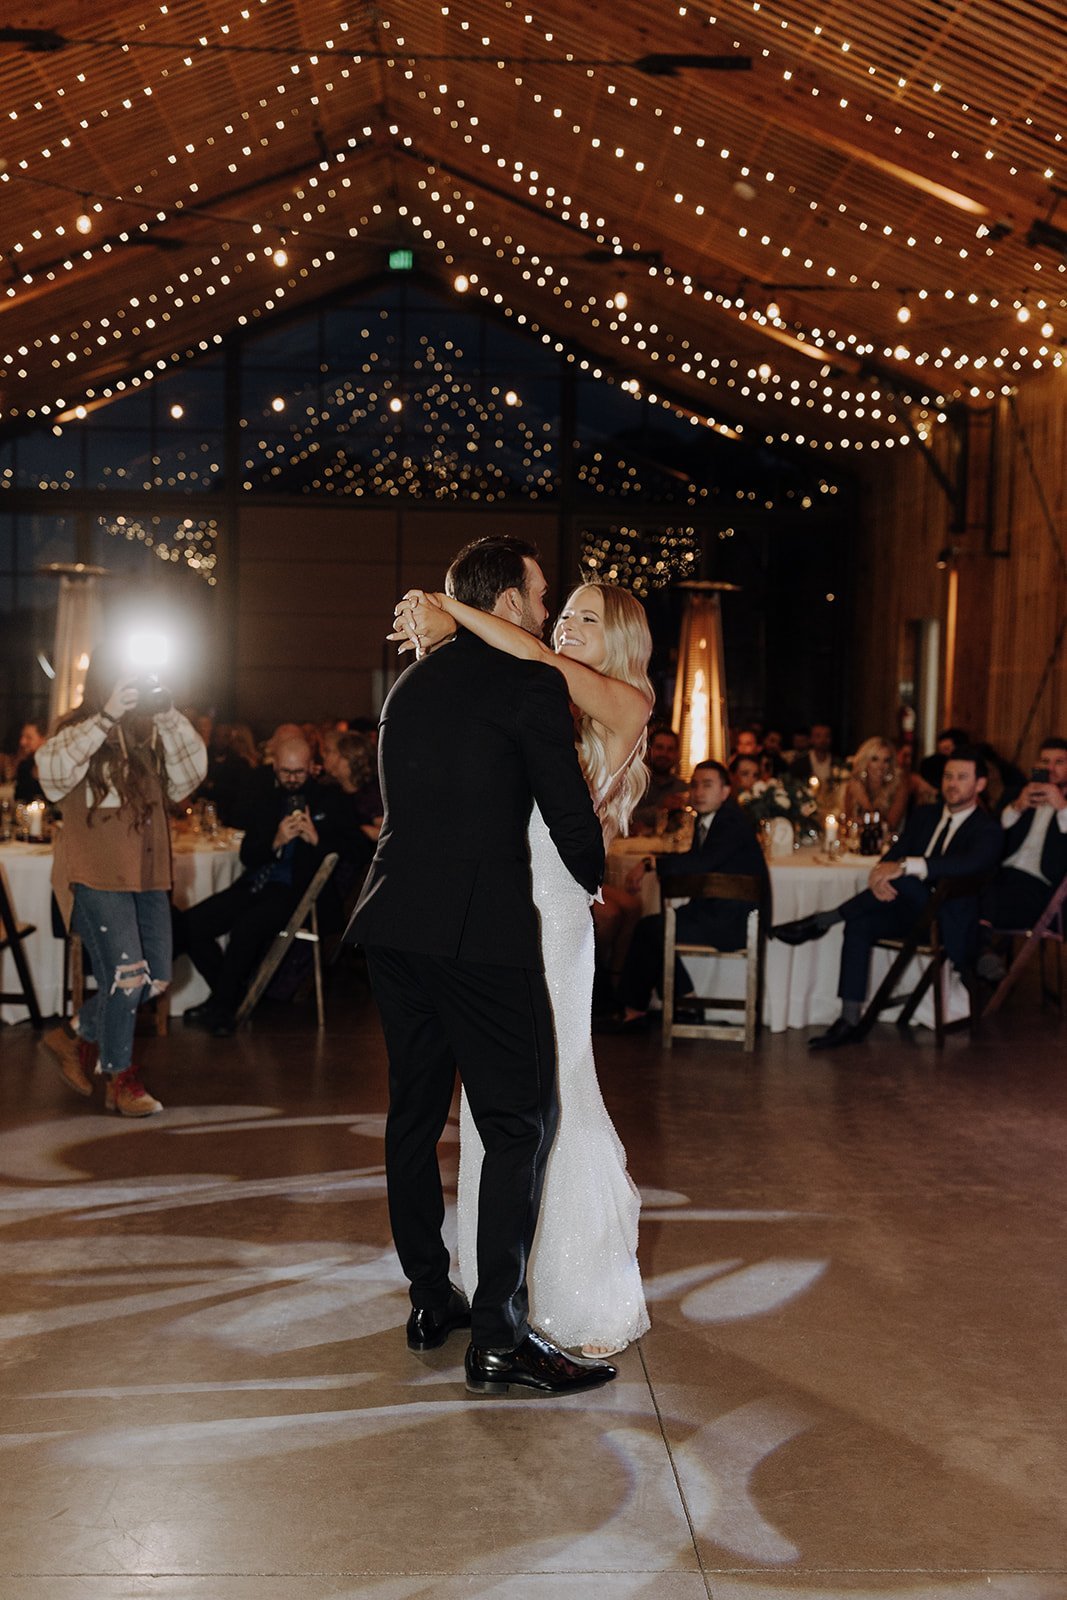 Bride and groom first dance at their reception